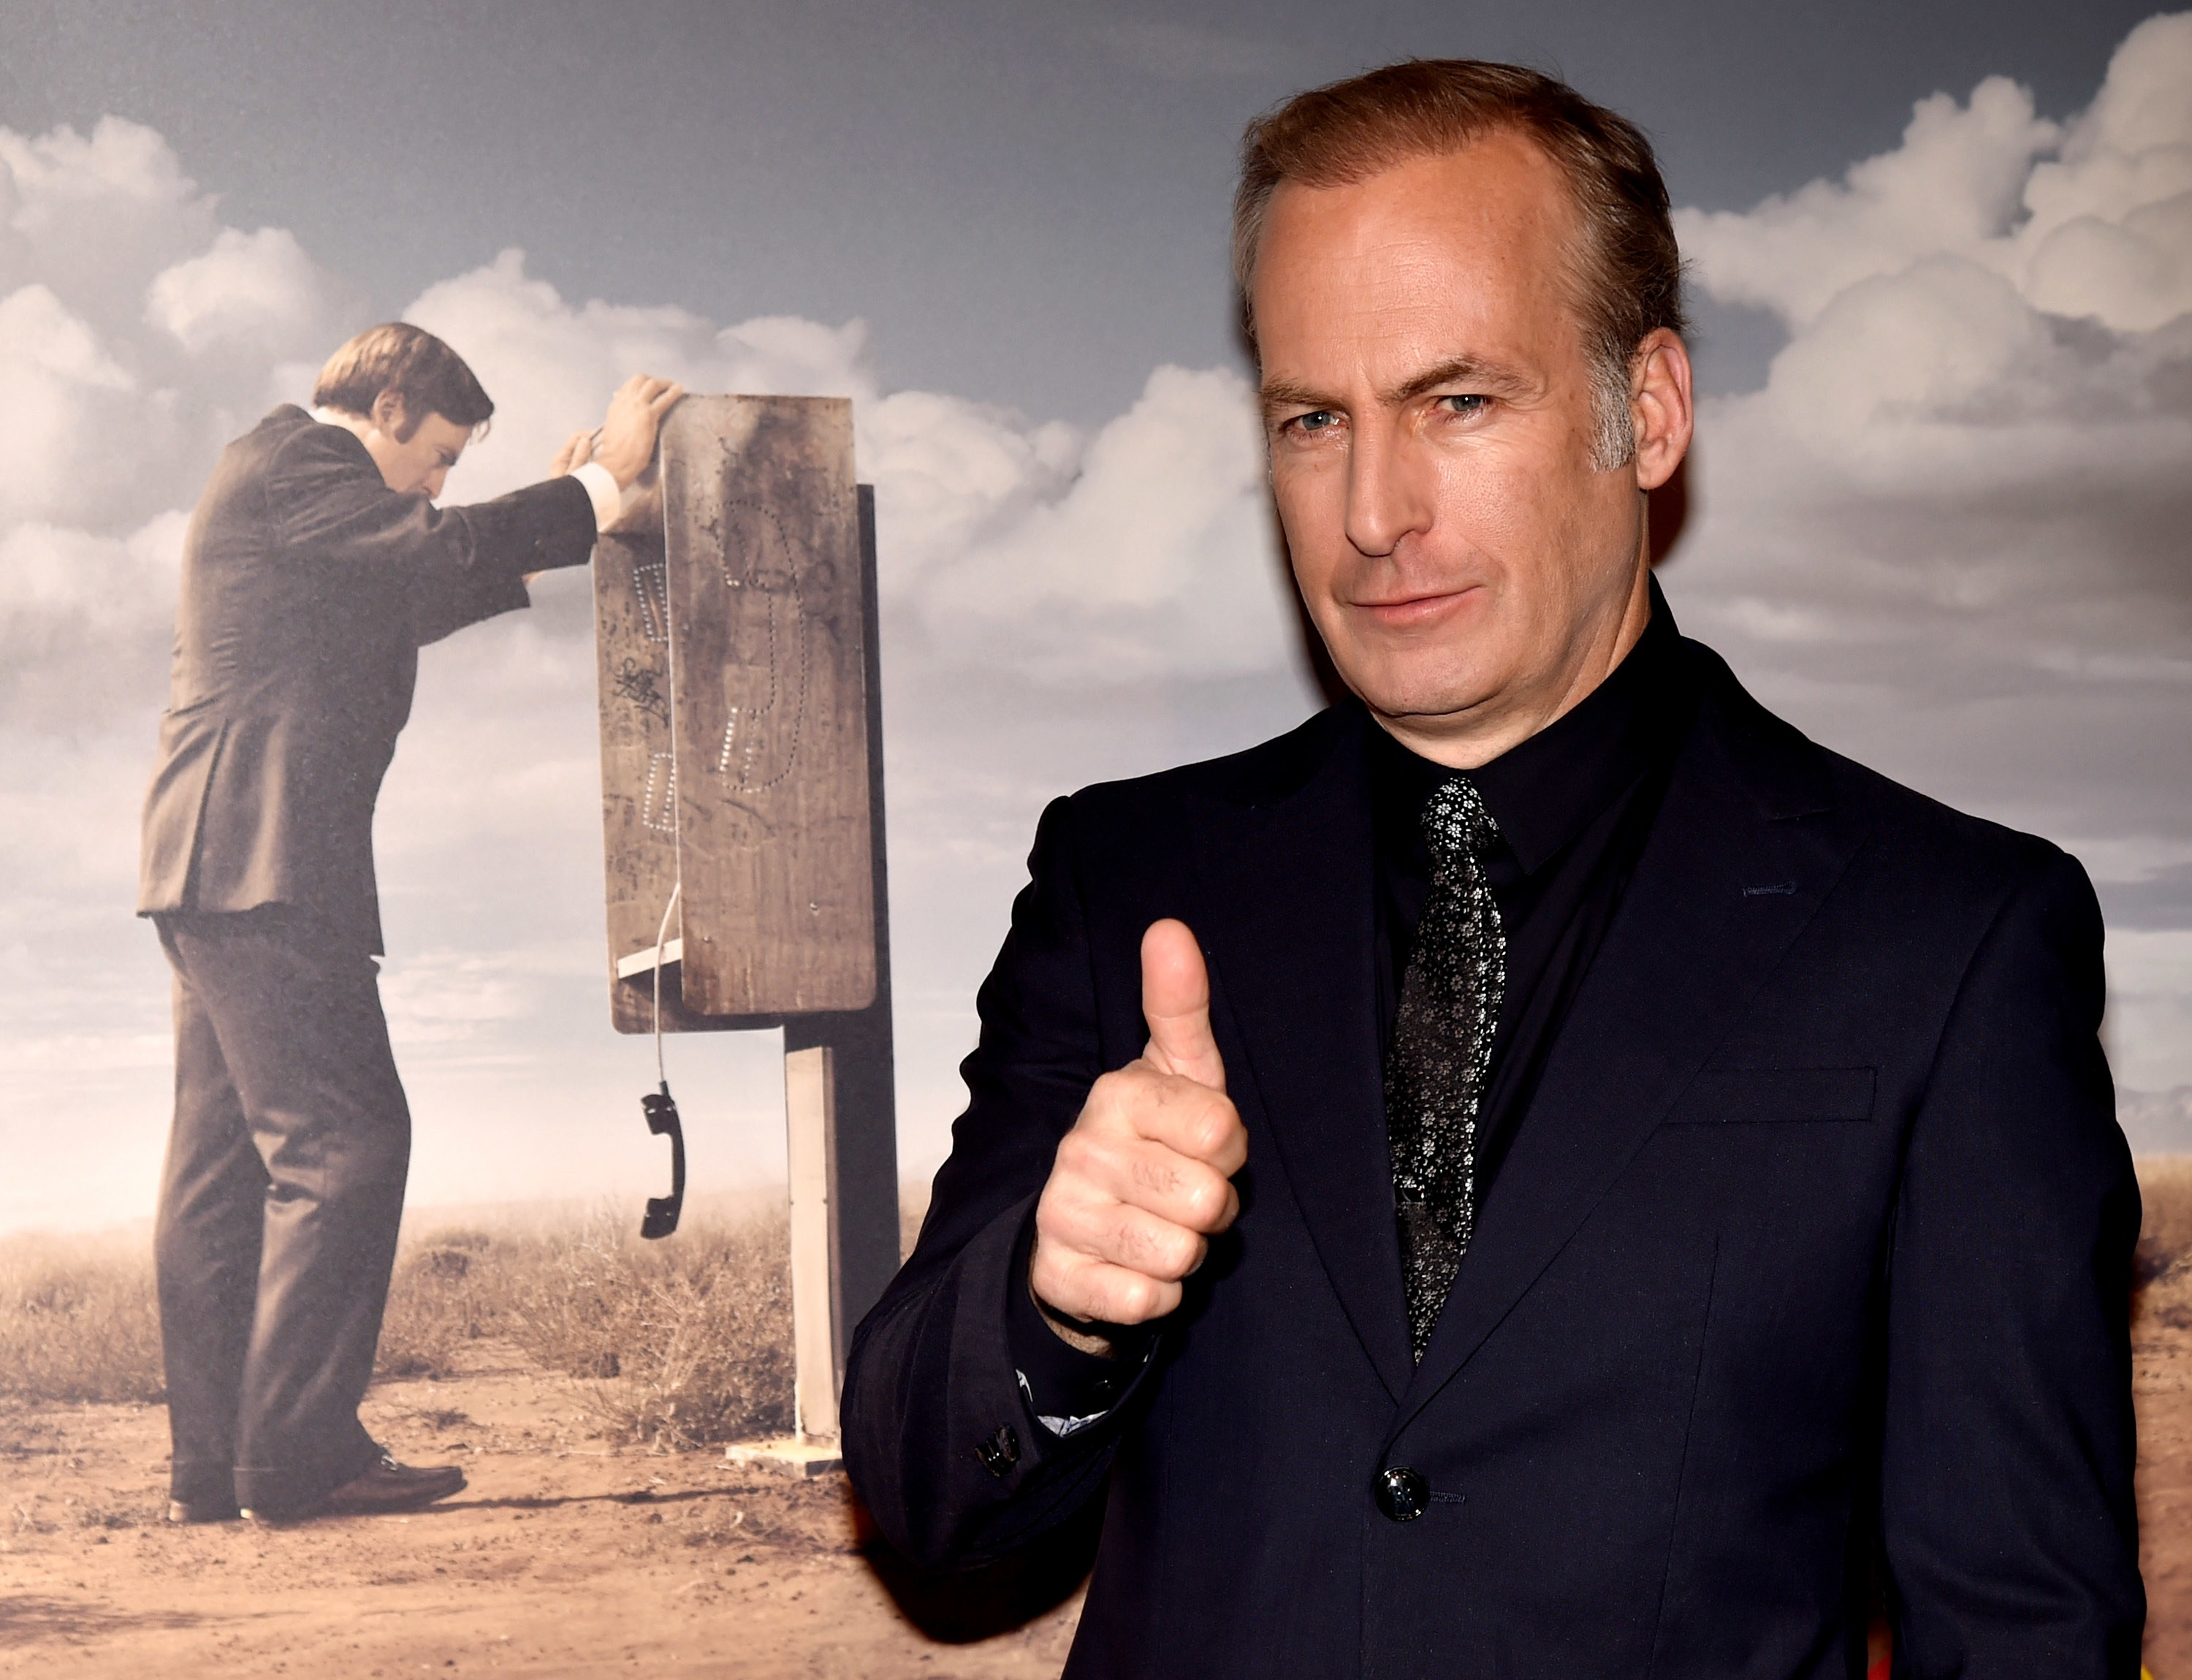 Odenkirk gives the thumbs up in front of a Better Call Saul poster